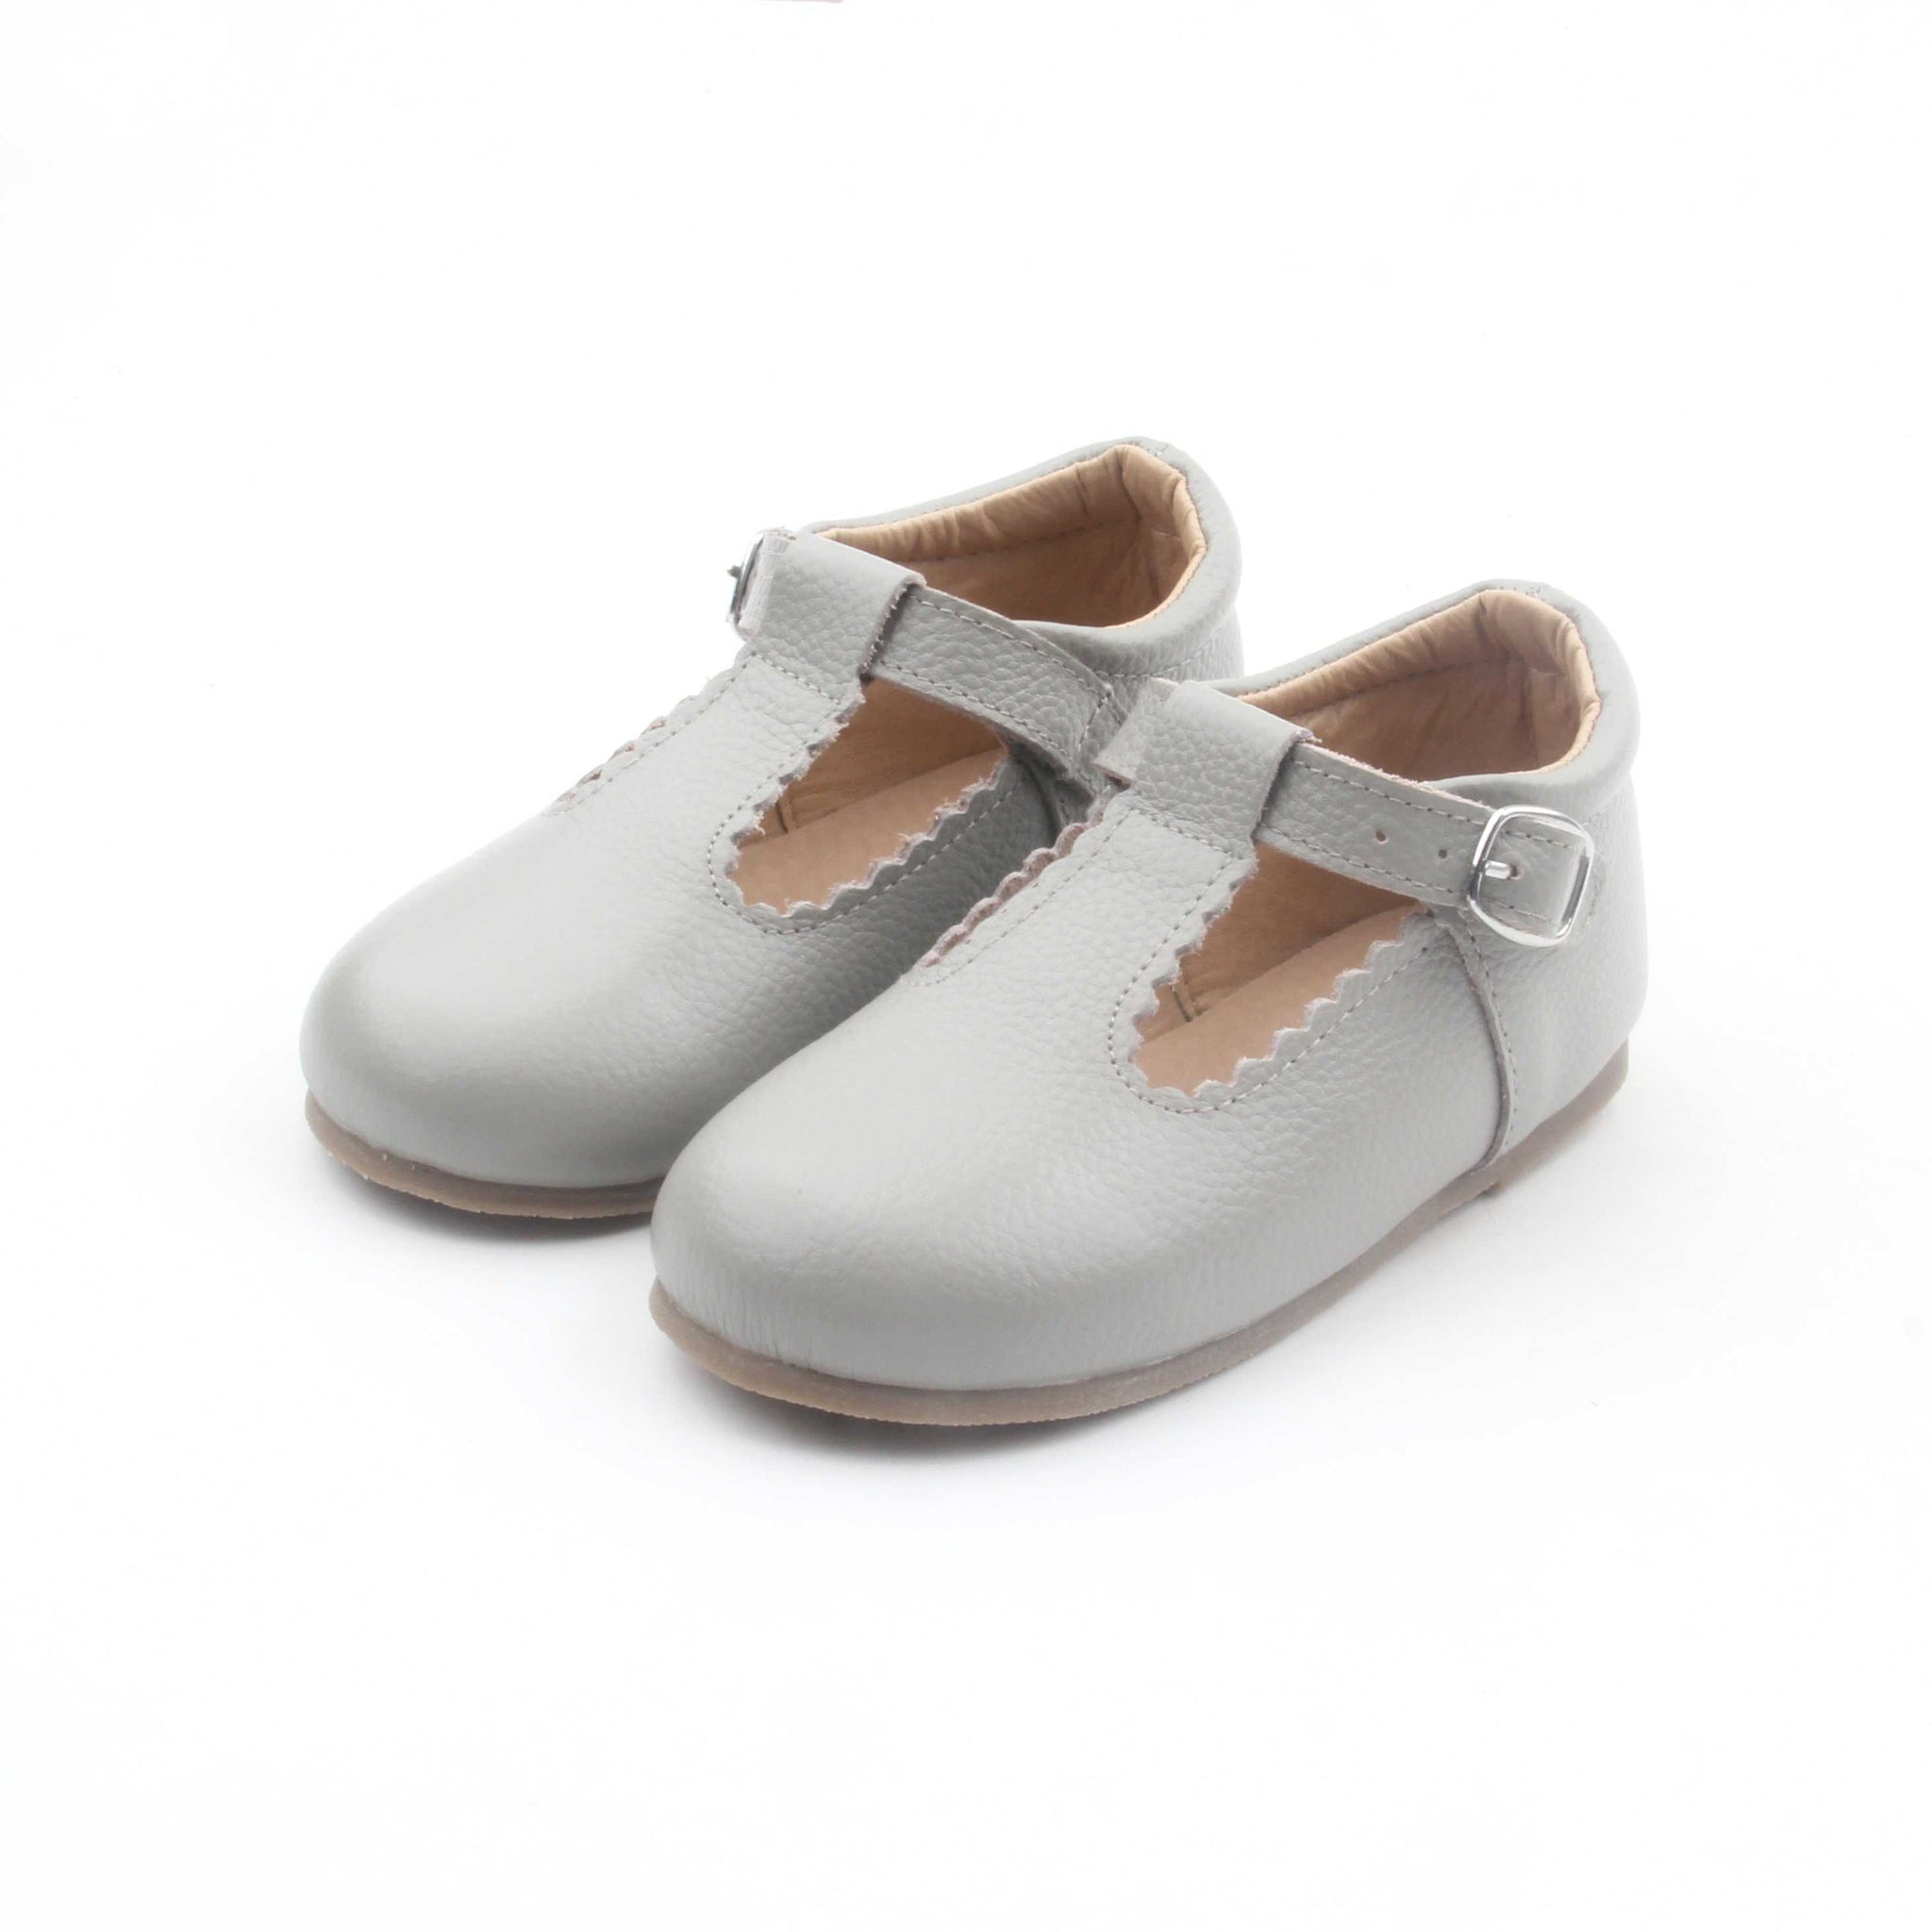 childrens t bar shoes